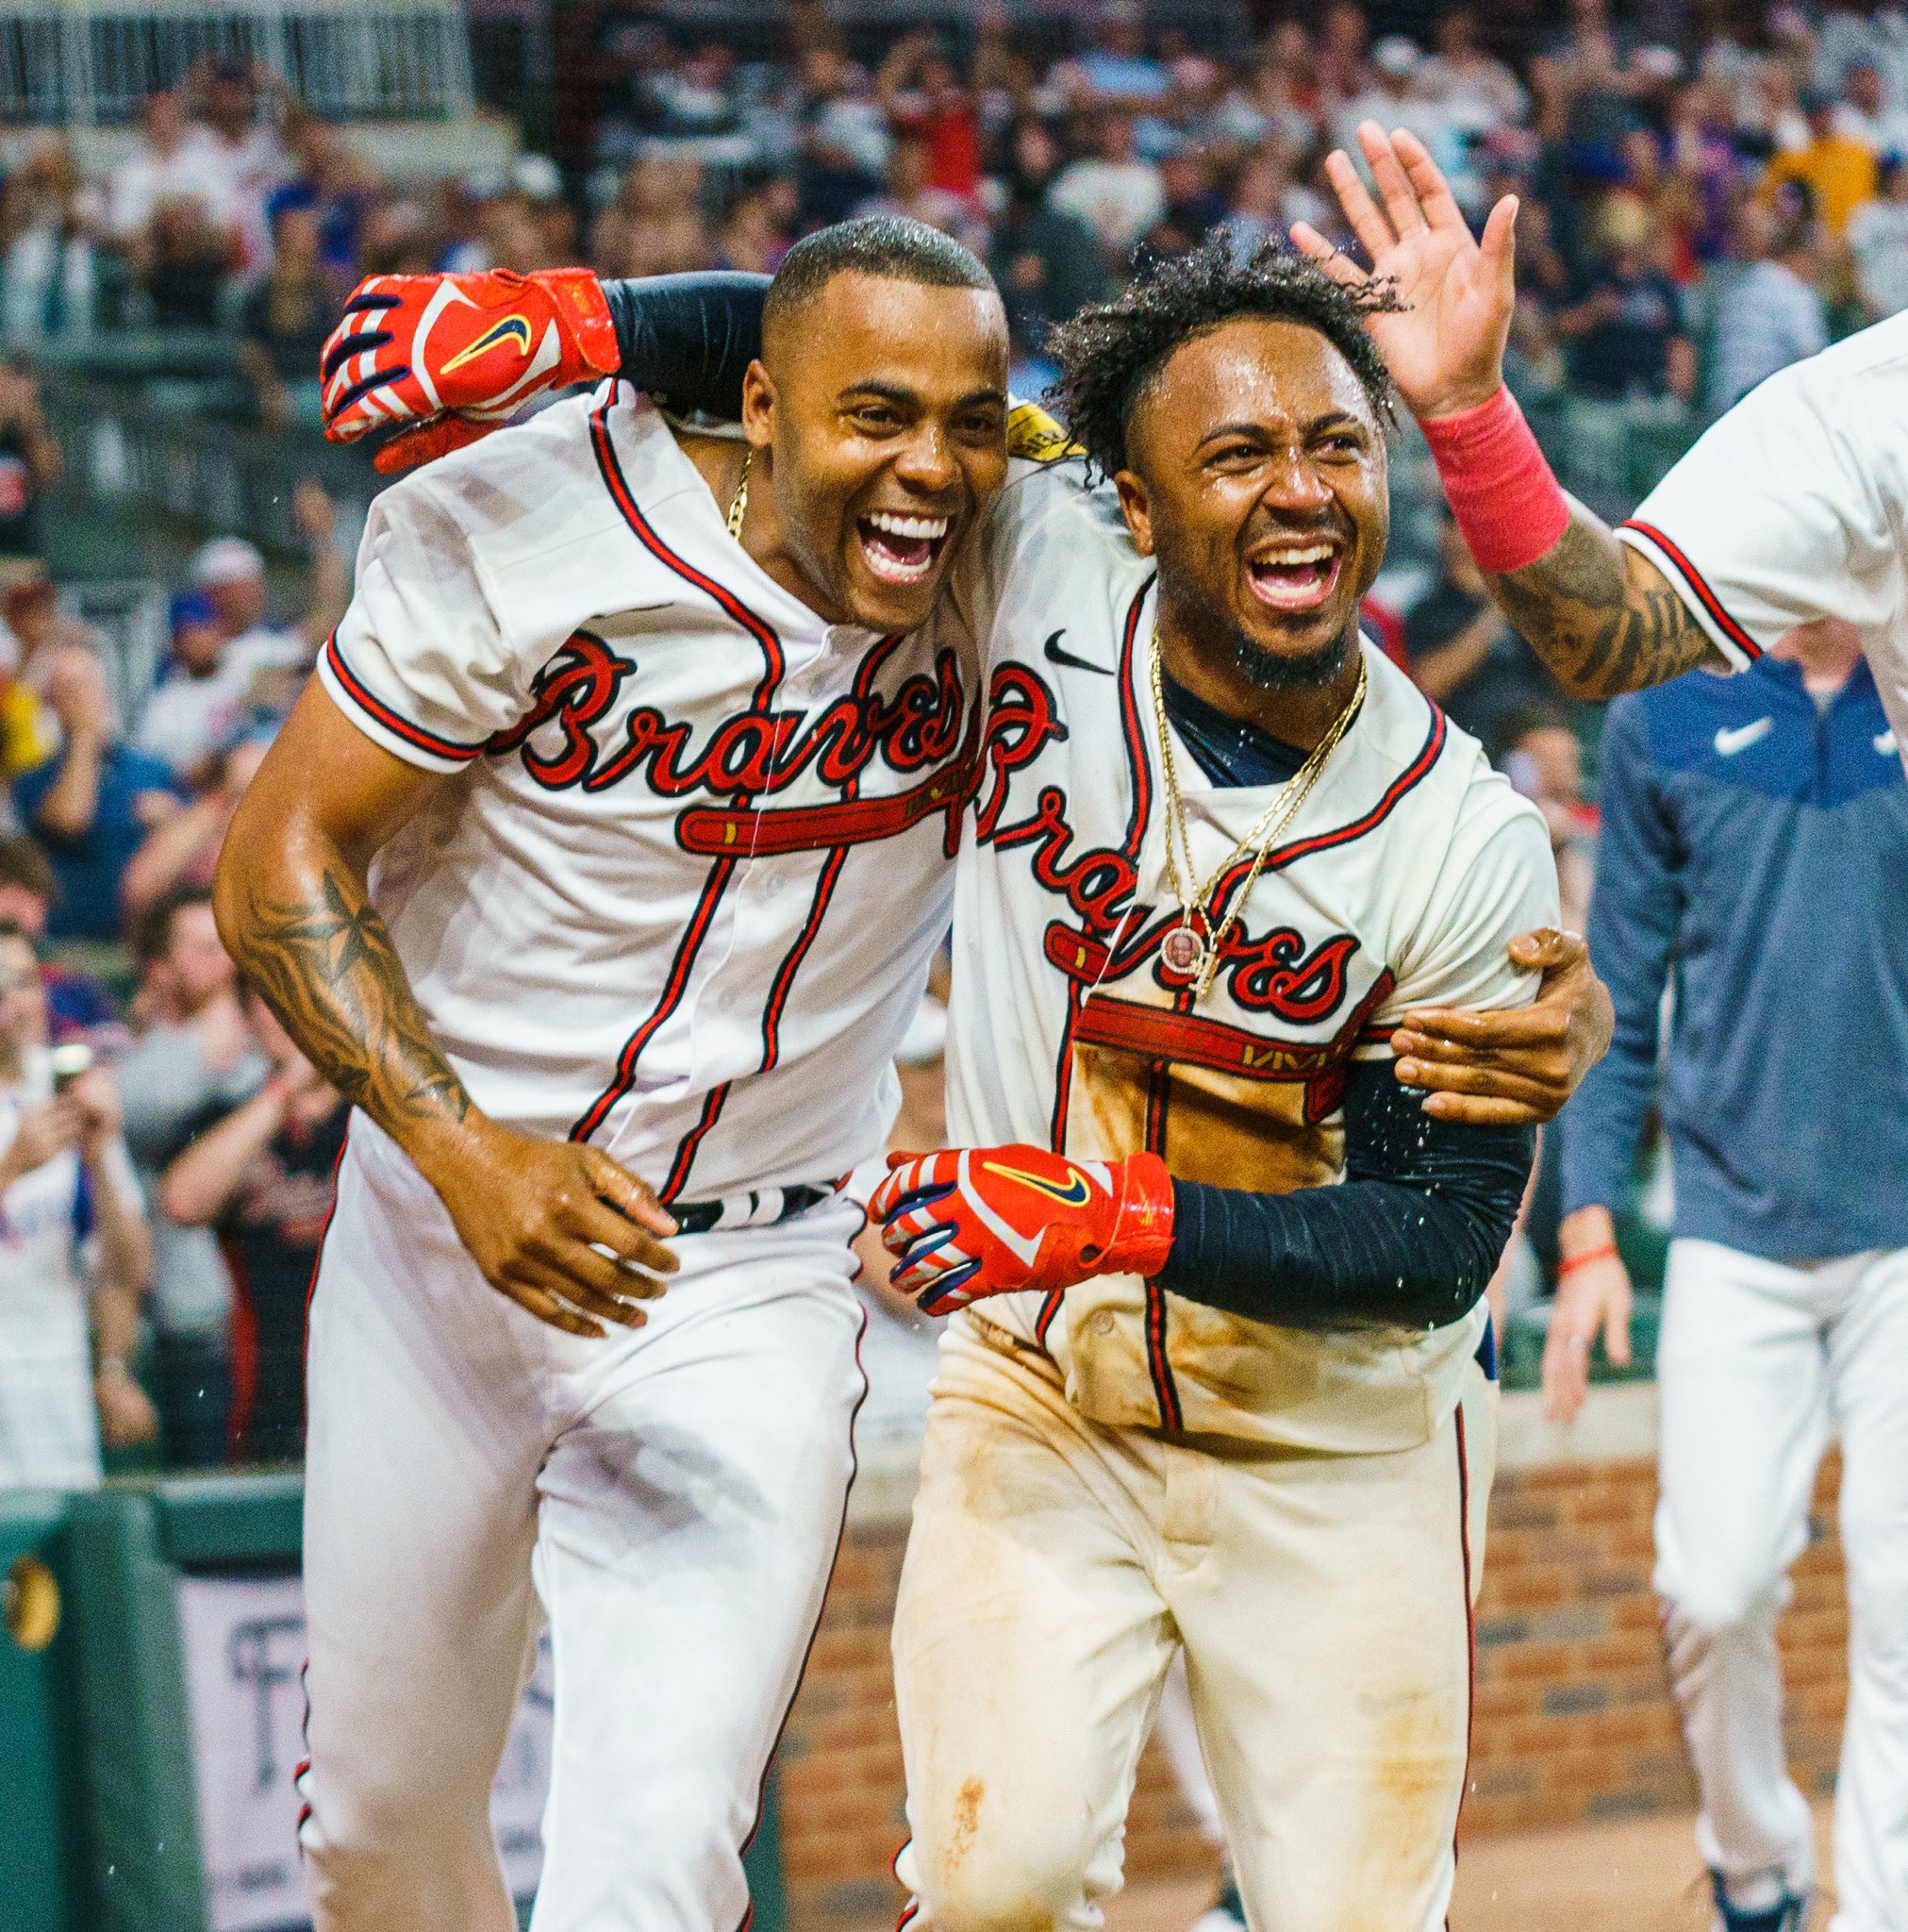 Ozzie Albies laughing during game